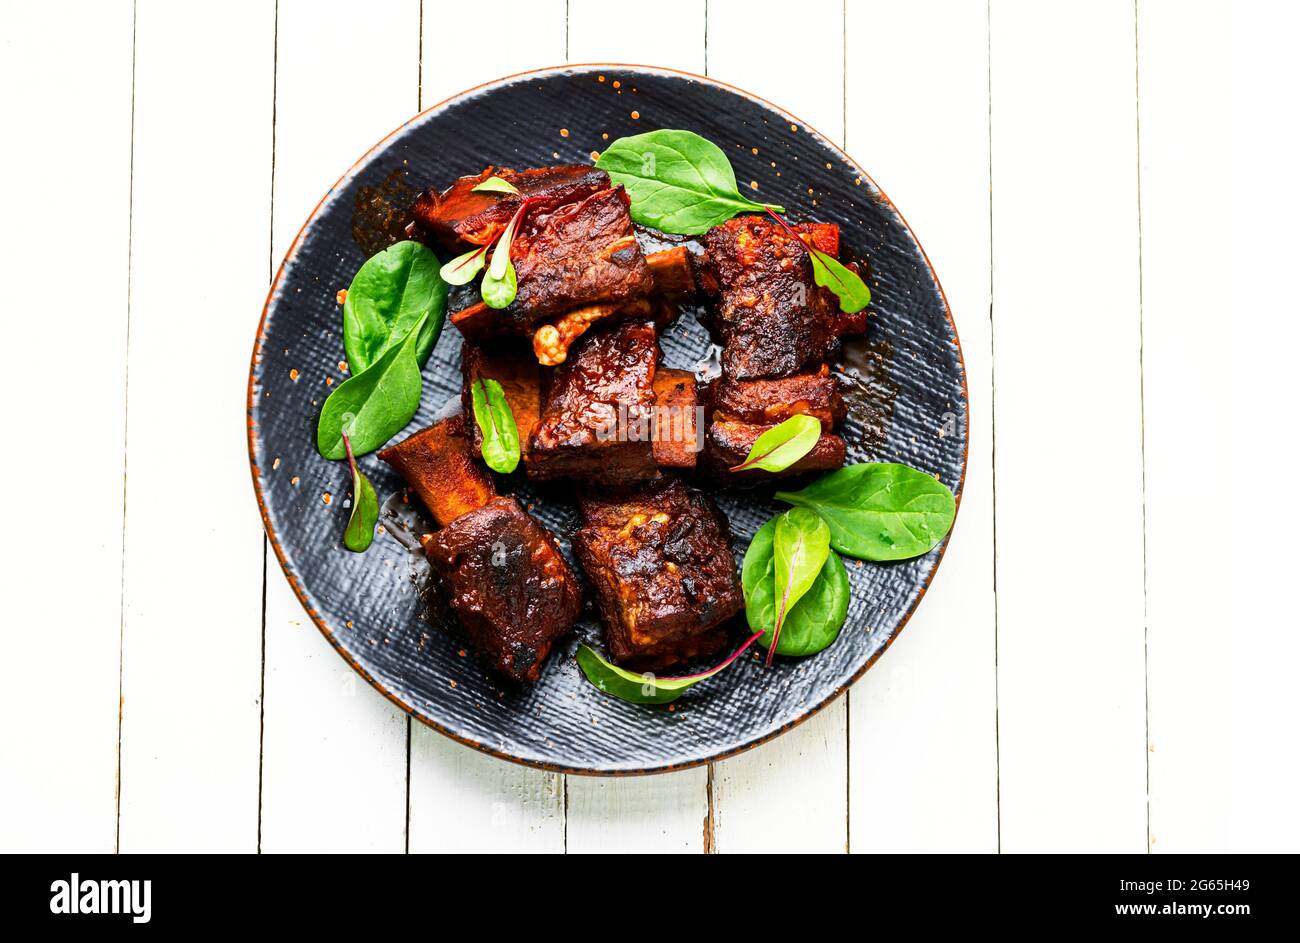 Tasty BBQ beef ribs seasoned with spicy sauce Stock Photo